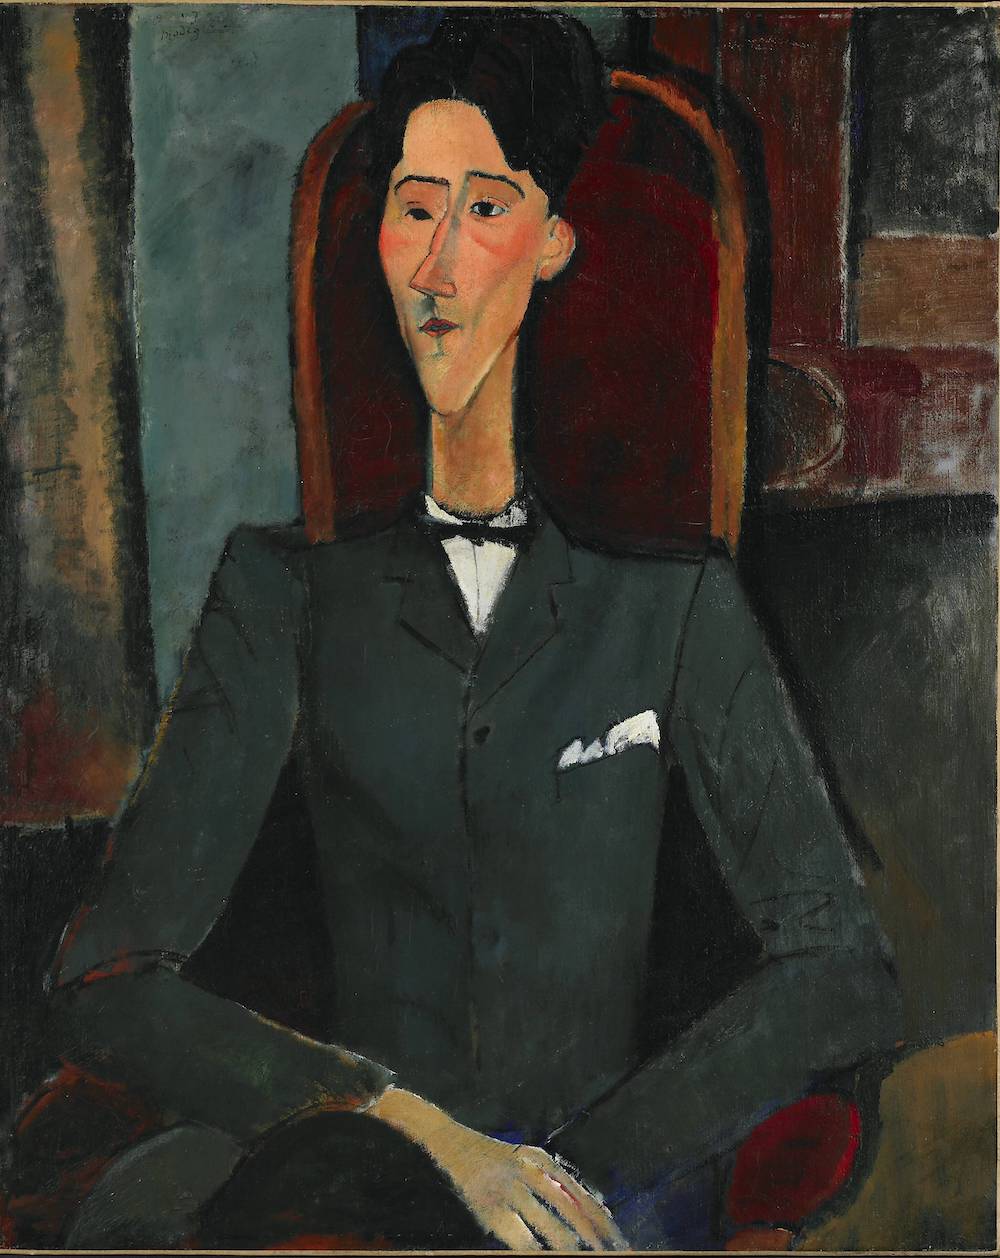 Amedeo Modigliani, Jean Cocteau, 1916, oil on canvas, the Henry and Rose Pearlman Foundation, on loan to the Princeton University Art Museum. Photograph: Bruce M. White